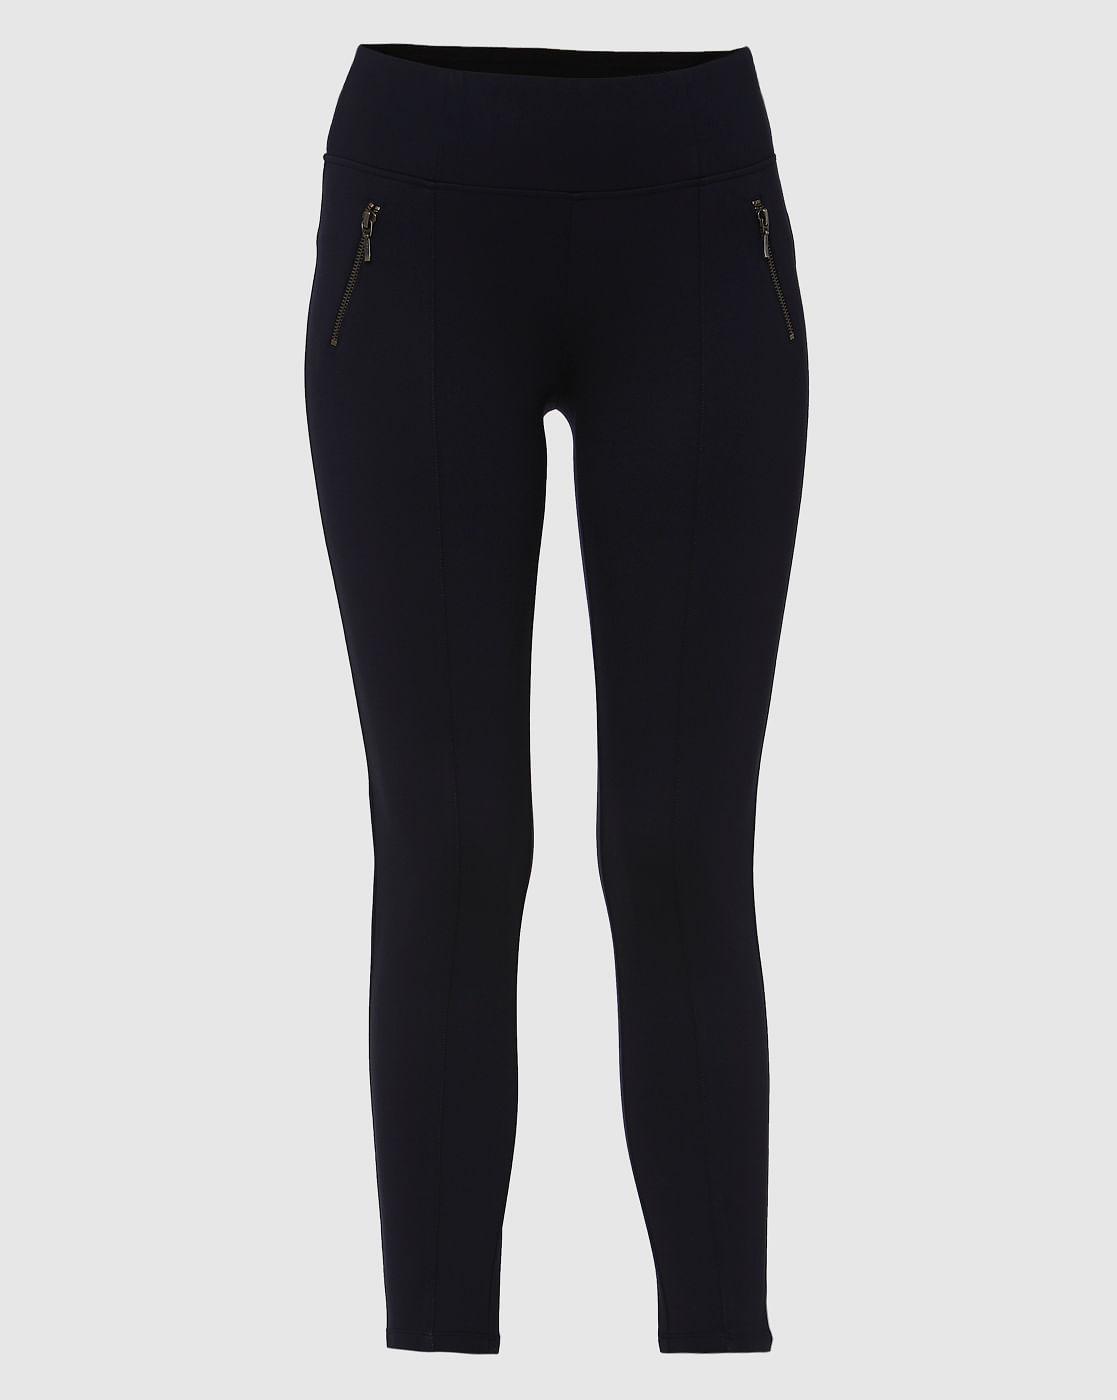 Leggings like trousers with zipper, black and chocolate - Polish Boutique  UK / Polish Clothes